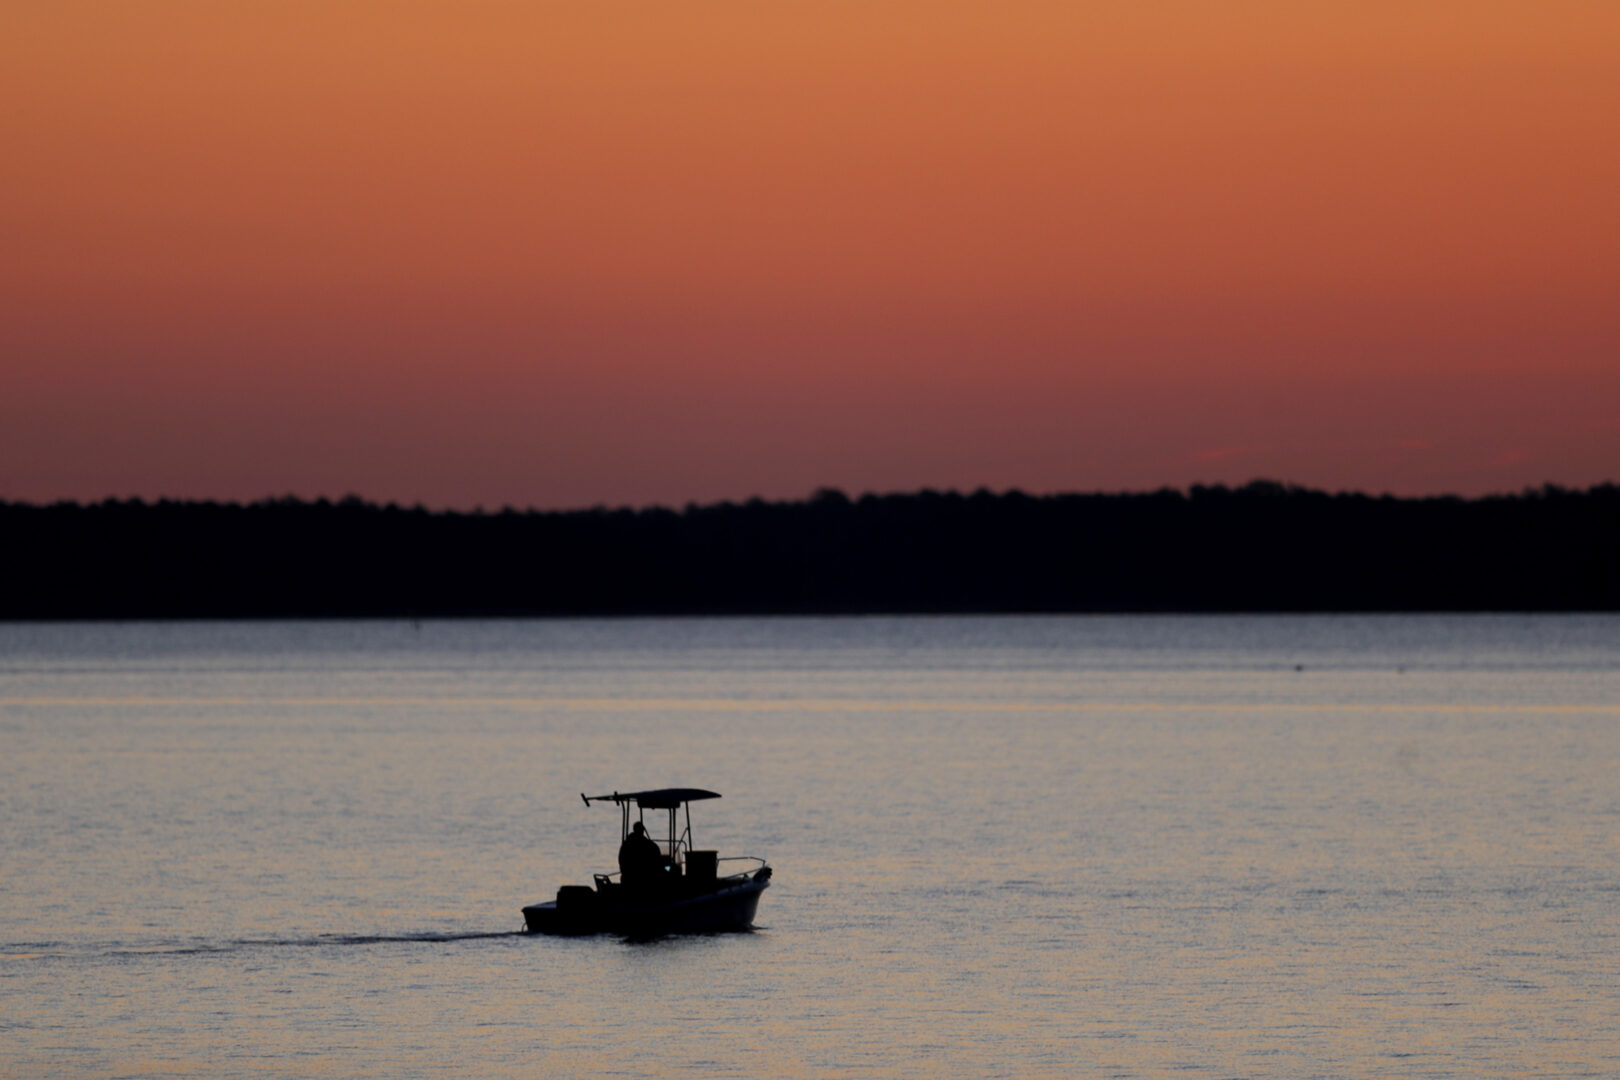 FILE - A small boat travels along the Honga River near the Chesapeake Bay, as the sky lights up at sunrise in Fishing Creek, Md., May 14, 2020. A report on the Chesapeake Bay released Tuesday, June 6, 2023, found strong disparities between communities in different parts of the bay's watershed in terms of health, economics and social justice concerns, presenting the challenges of improving the health of the nation's largest estuary in a larger context. 